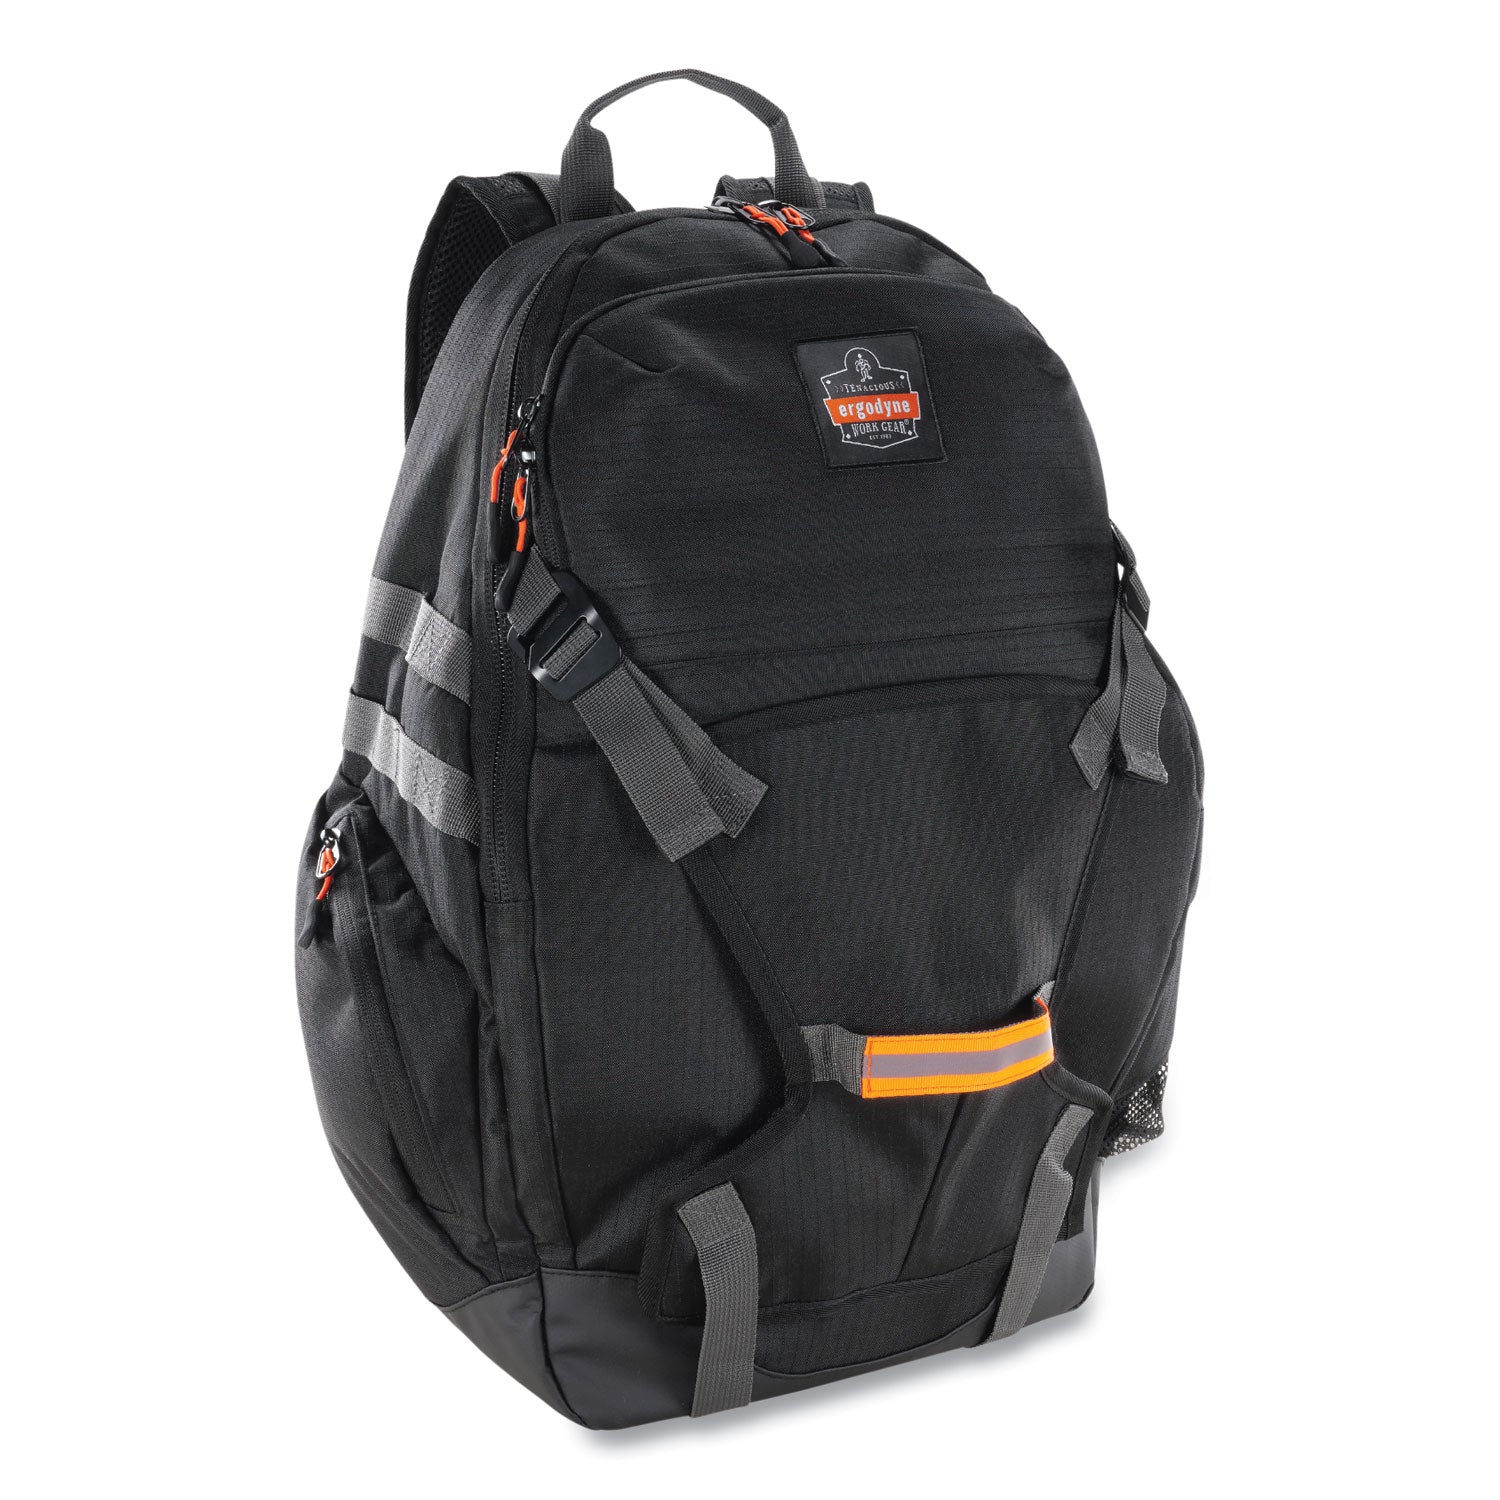 arsenal-5188-ppe-jobsite-backpack-7-x-15-x-20-black-ships-in-1-3-business-days_ego13188 - 1